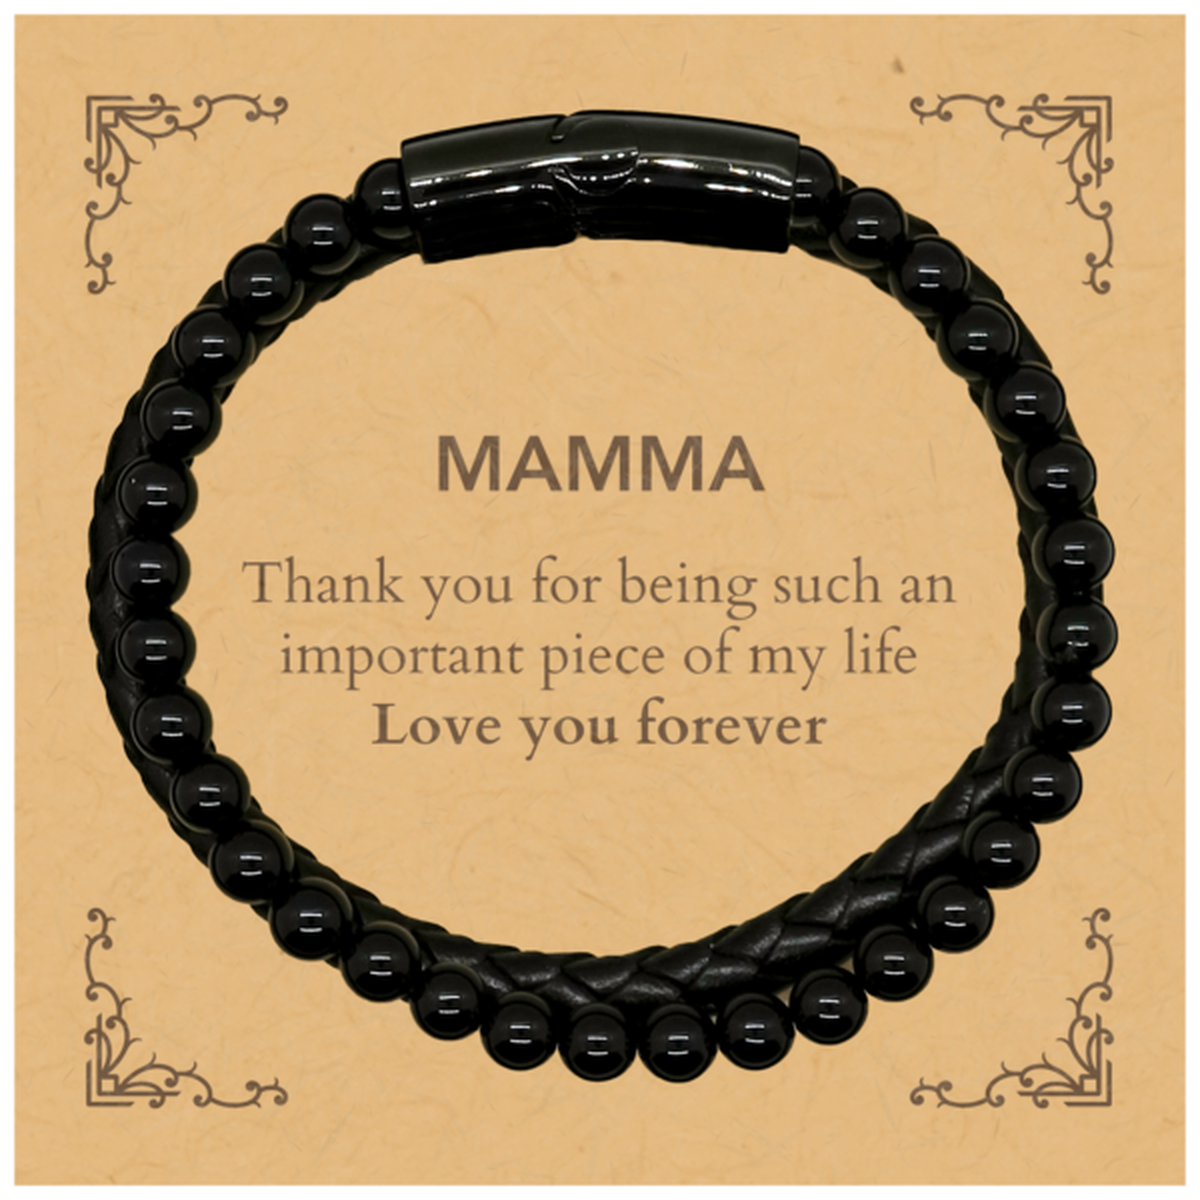 Appropriate Mamma Stone Leather Bracelets Epic Birthday Gifts for Mamma Thank you for being such an important piece of my life Mamma Christmas Mothers Fathers Day